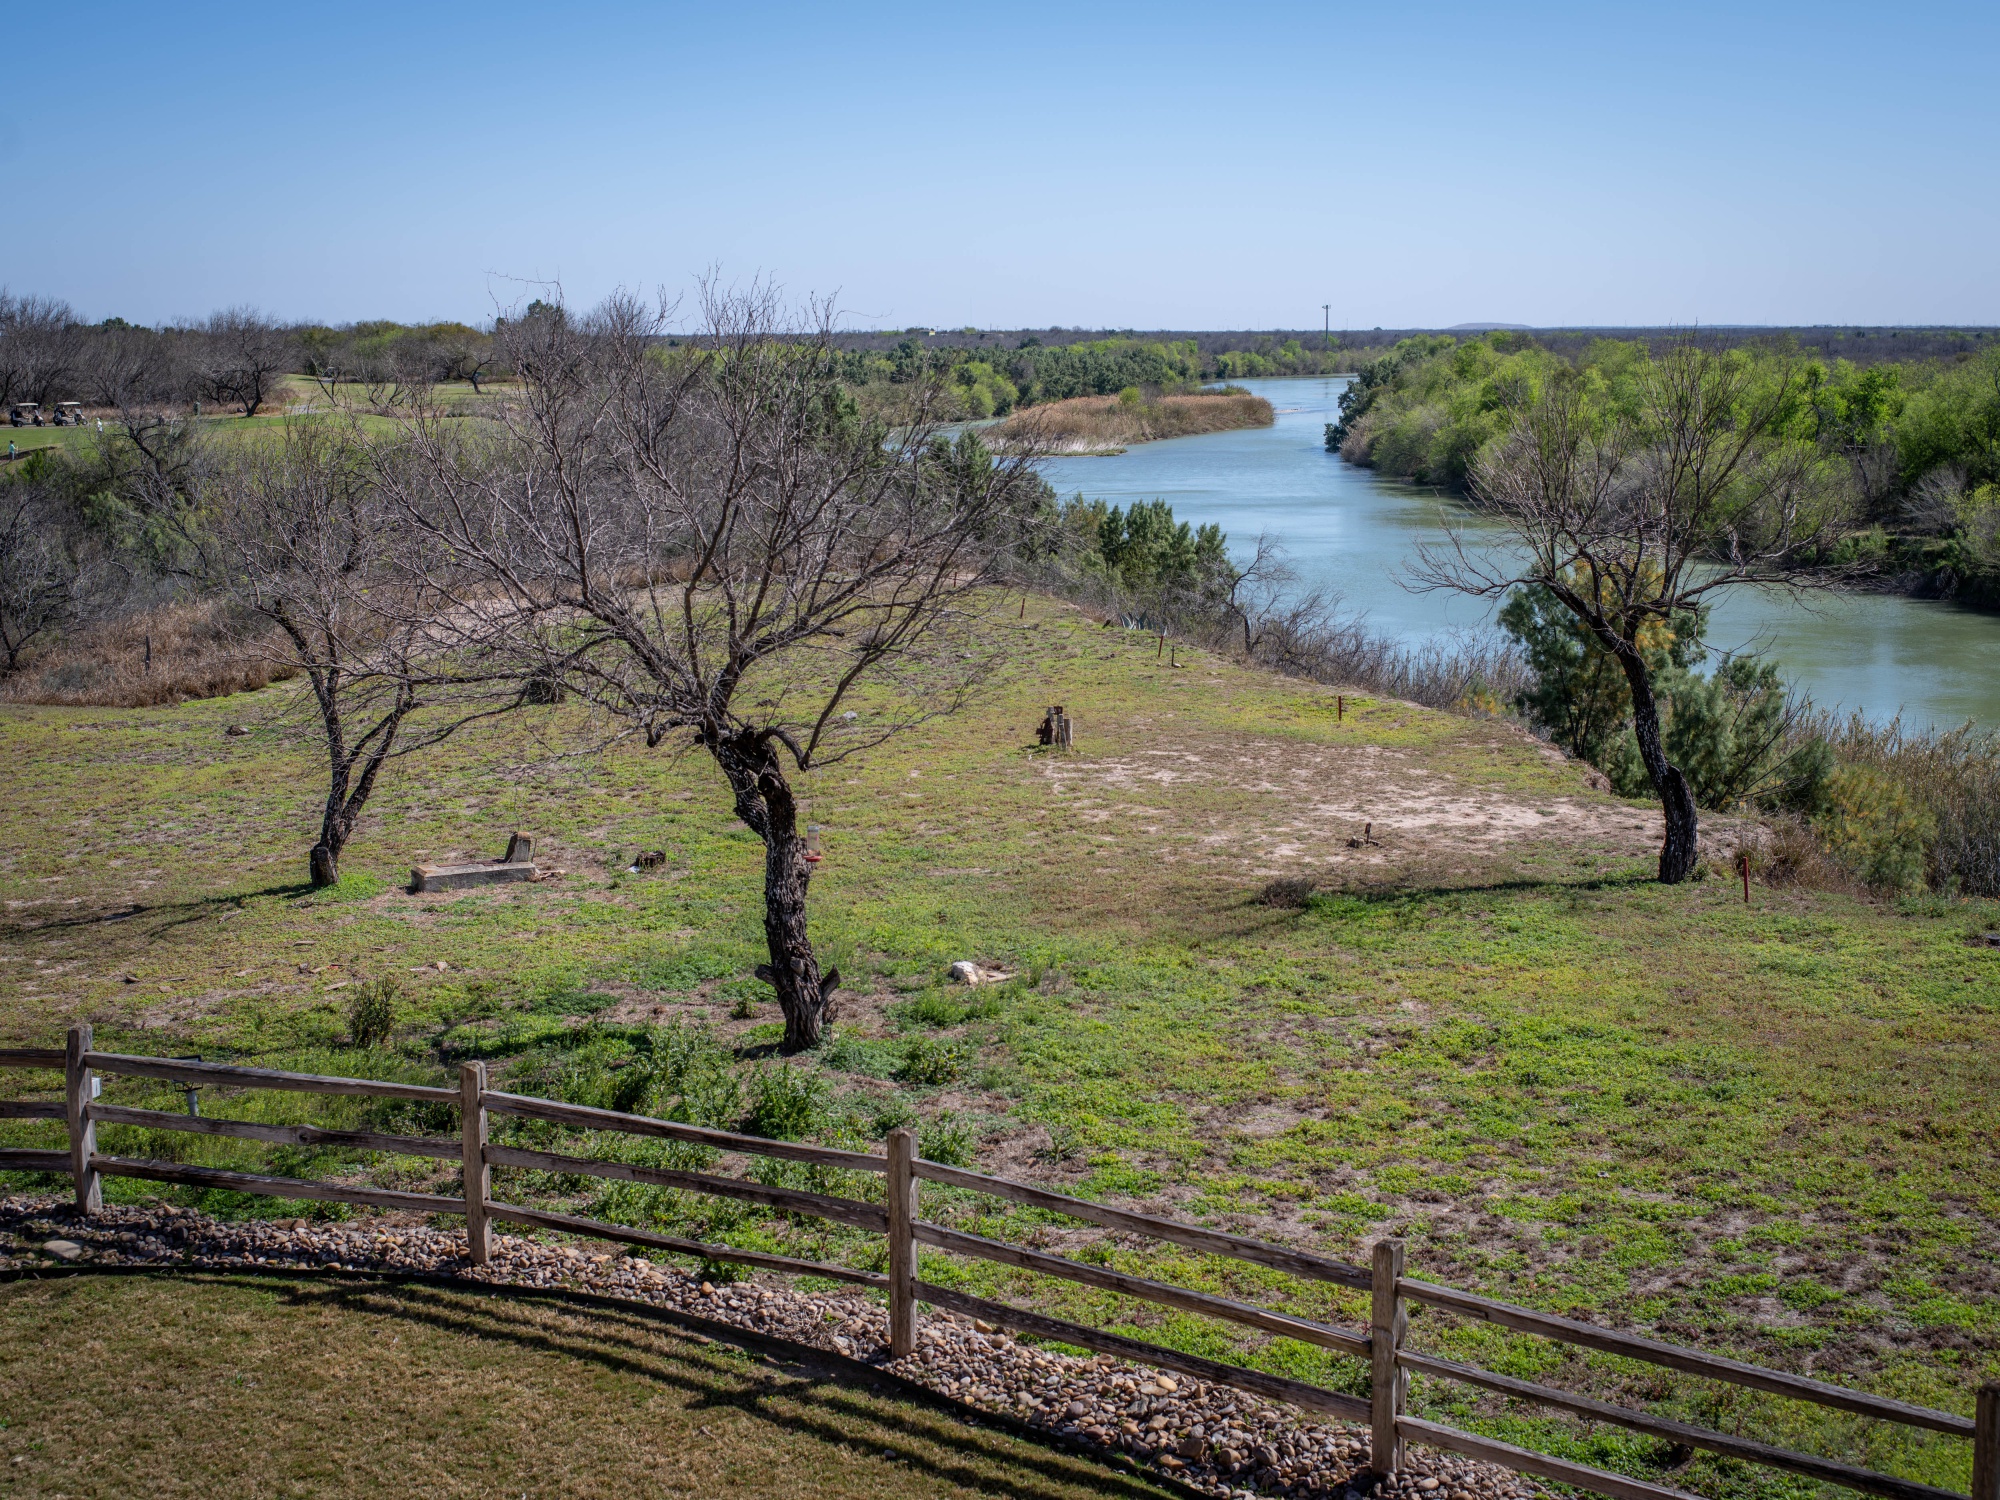 View of the Rio Grande from the Max A Mandel Municipal Golf Course.